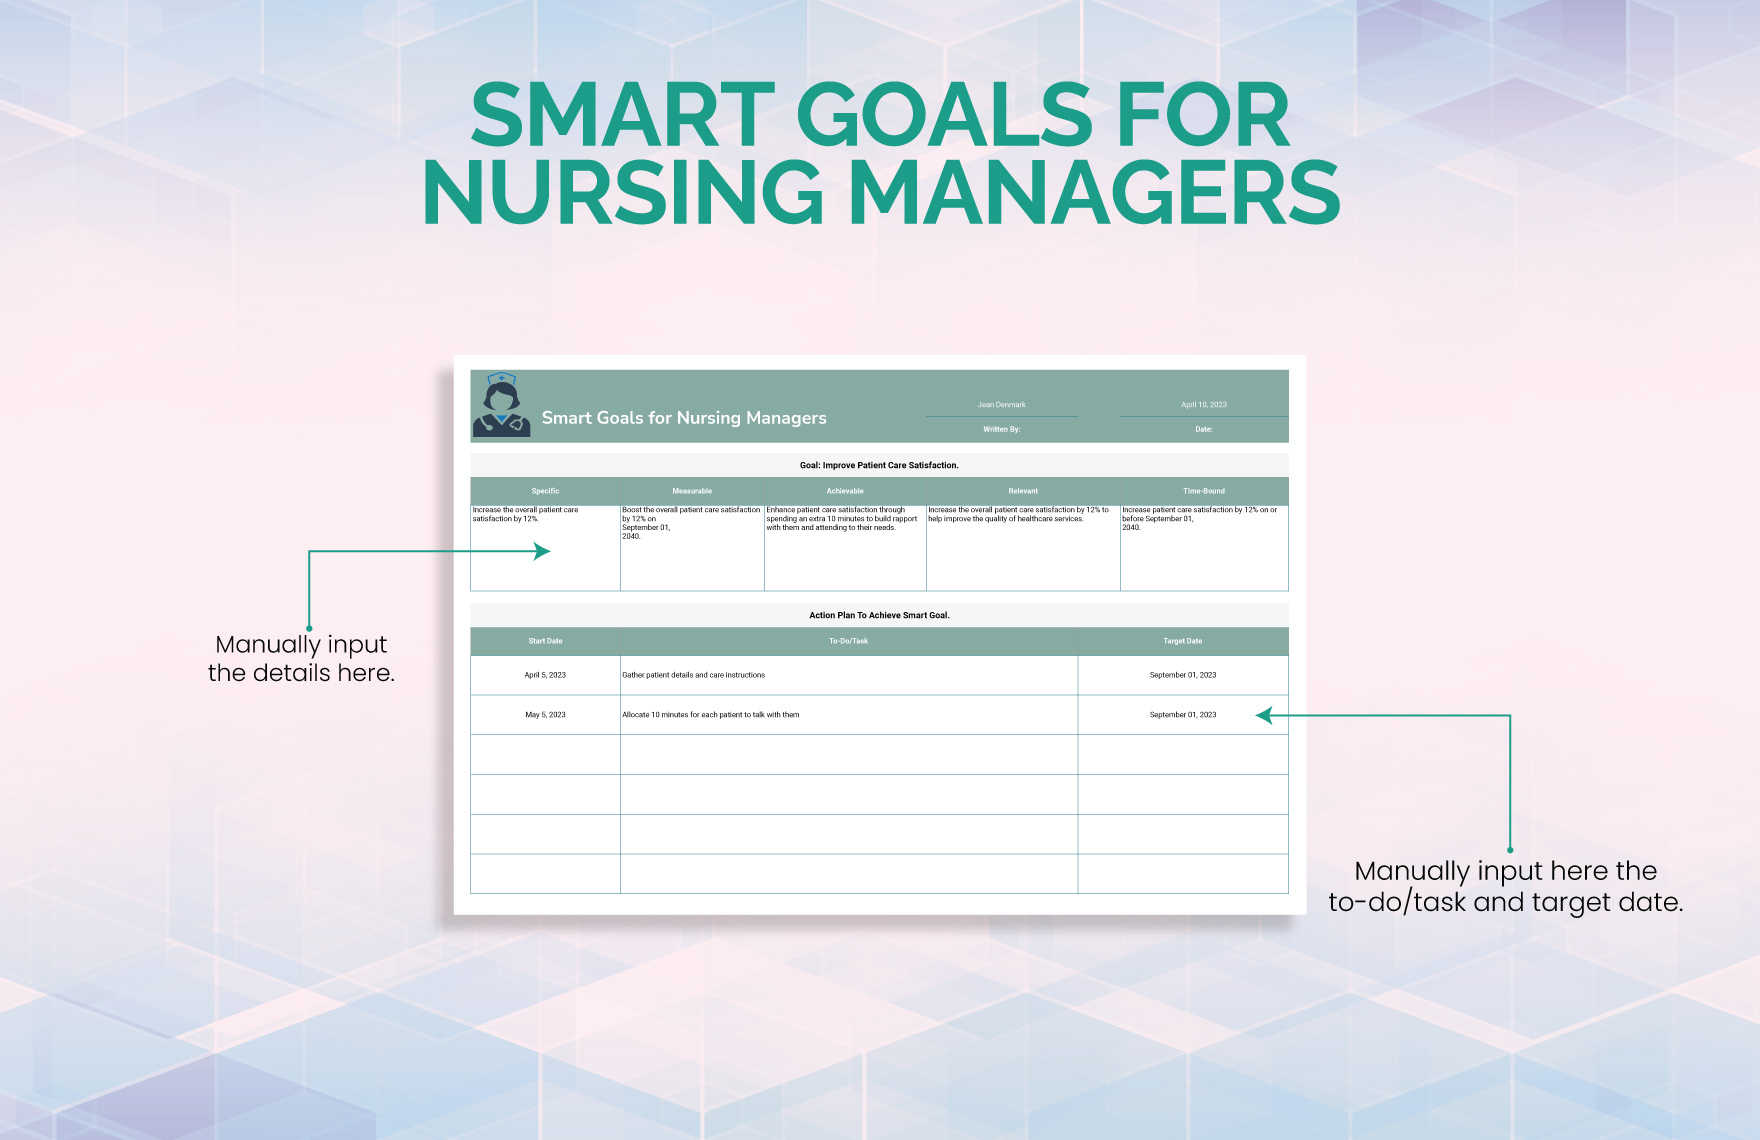 Smart Goals For Nursing Managers Template